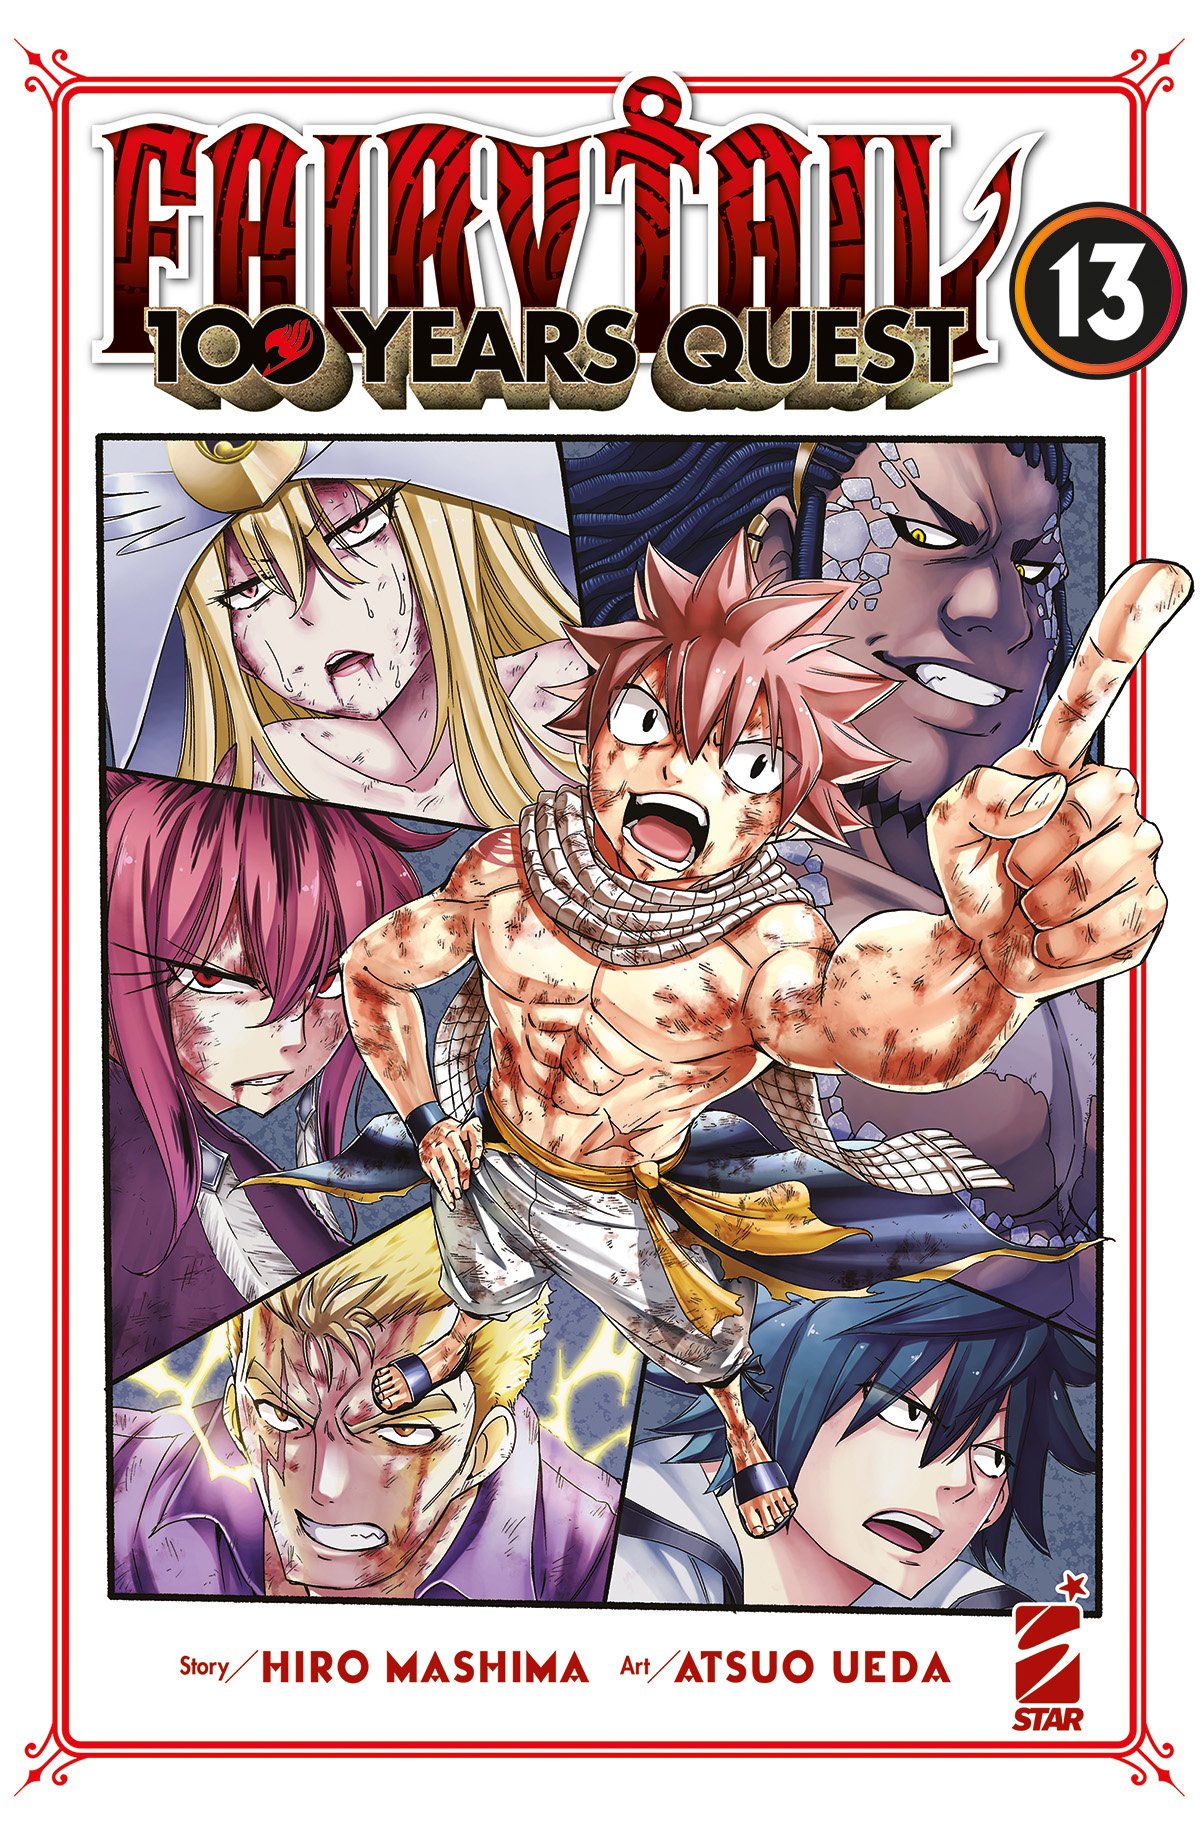 FAIRY TAIL 100 YEARS QUEST 13 YOUNG 345